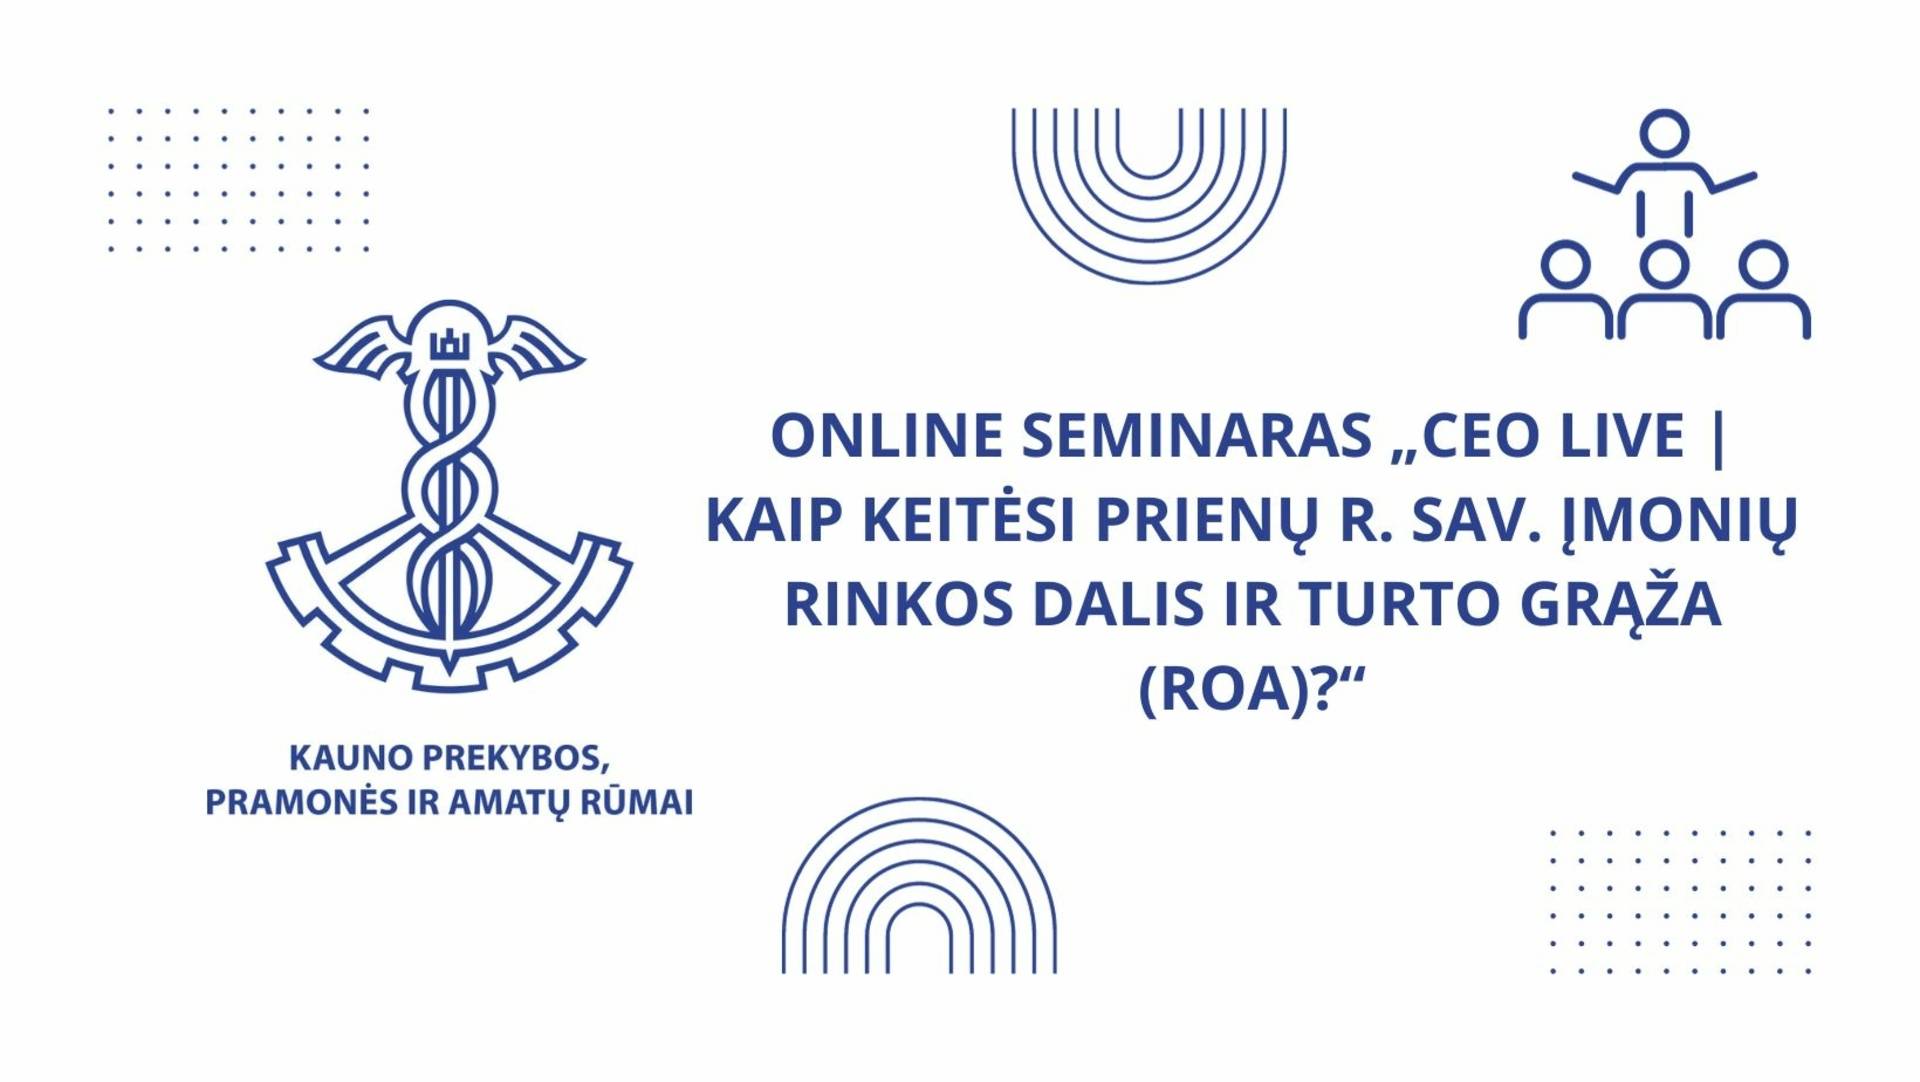 ONLINE SEMINAR "CEO LIVE | HOW DID PRIENő R. SAV CHANGE? CORPORATE MARKET SHARE AND RETURN ON ASSETS (ROA)?'